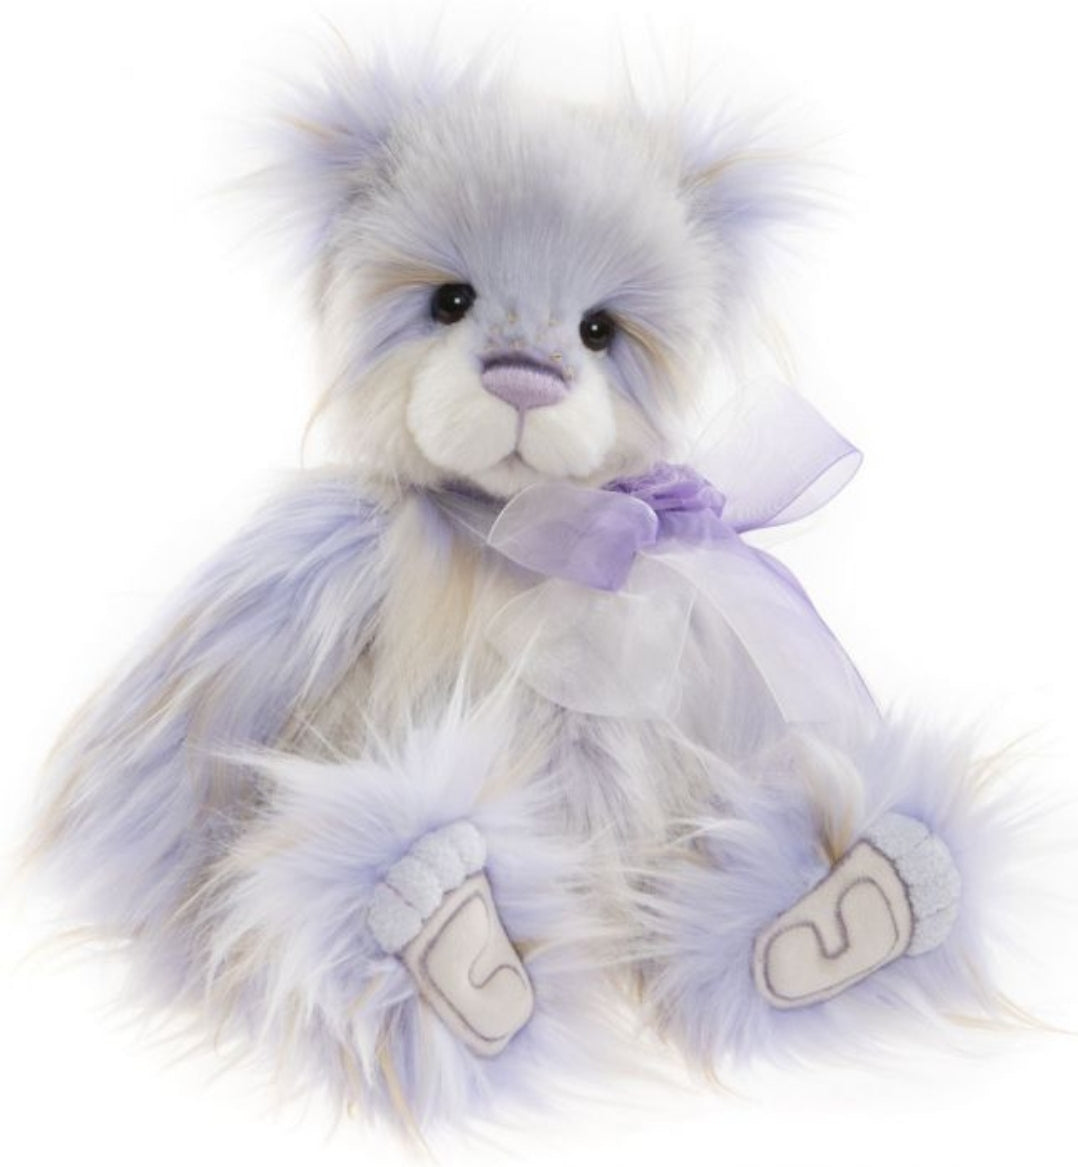 Popping Candy - 14.5" Long Haired Panda by Charlie Bears